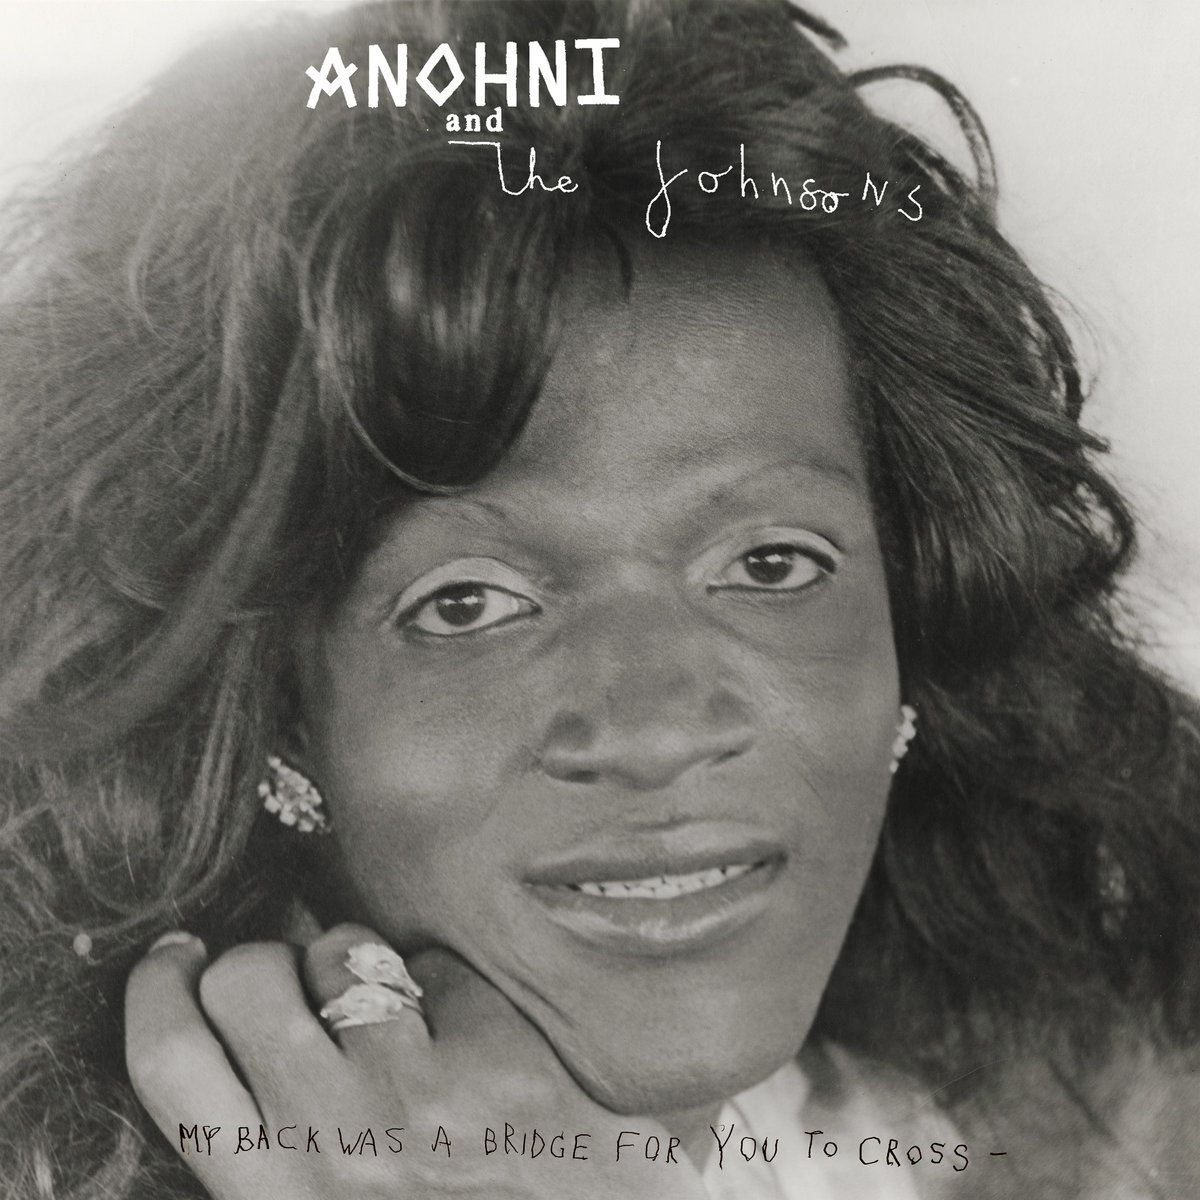 Anohni & The Johnsons - My Back Was a Bridge For You To Cross - LP